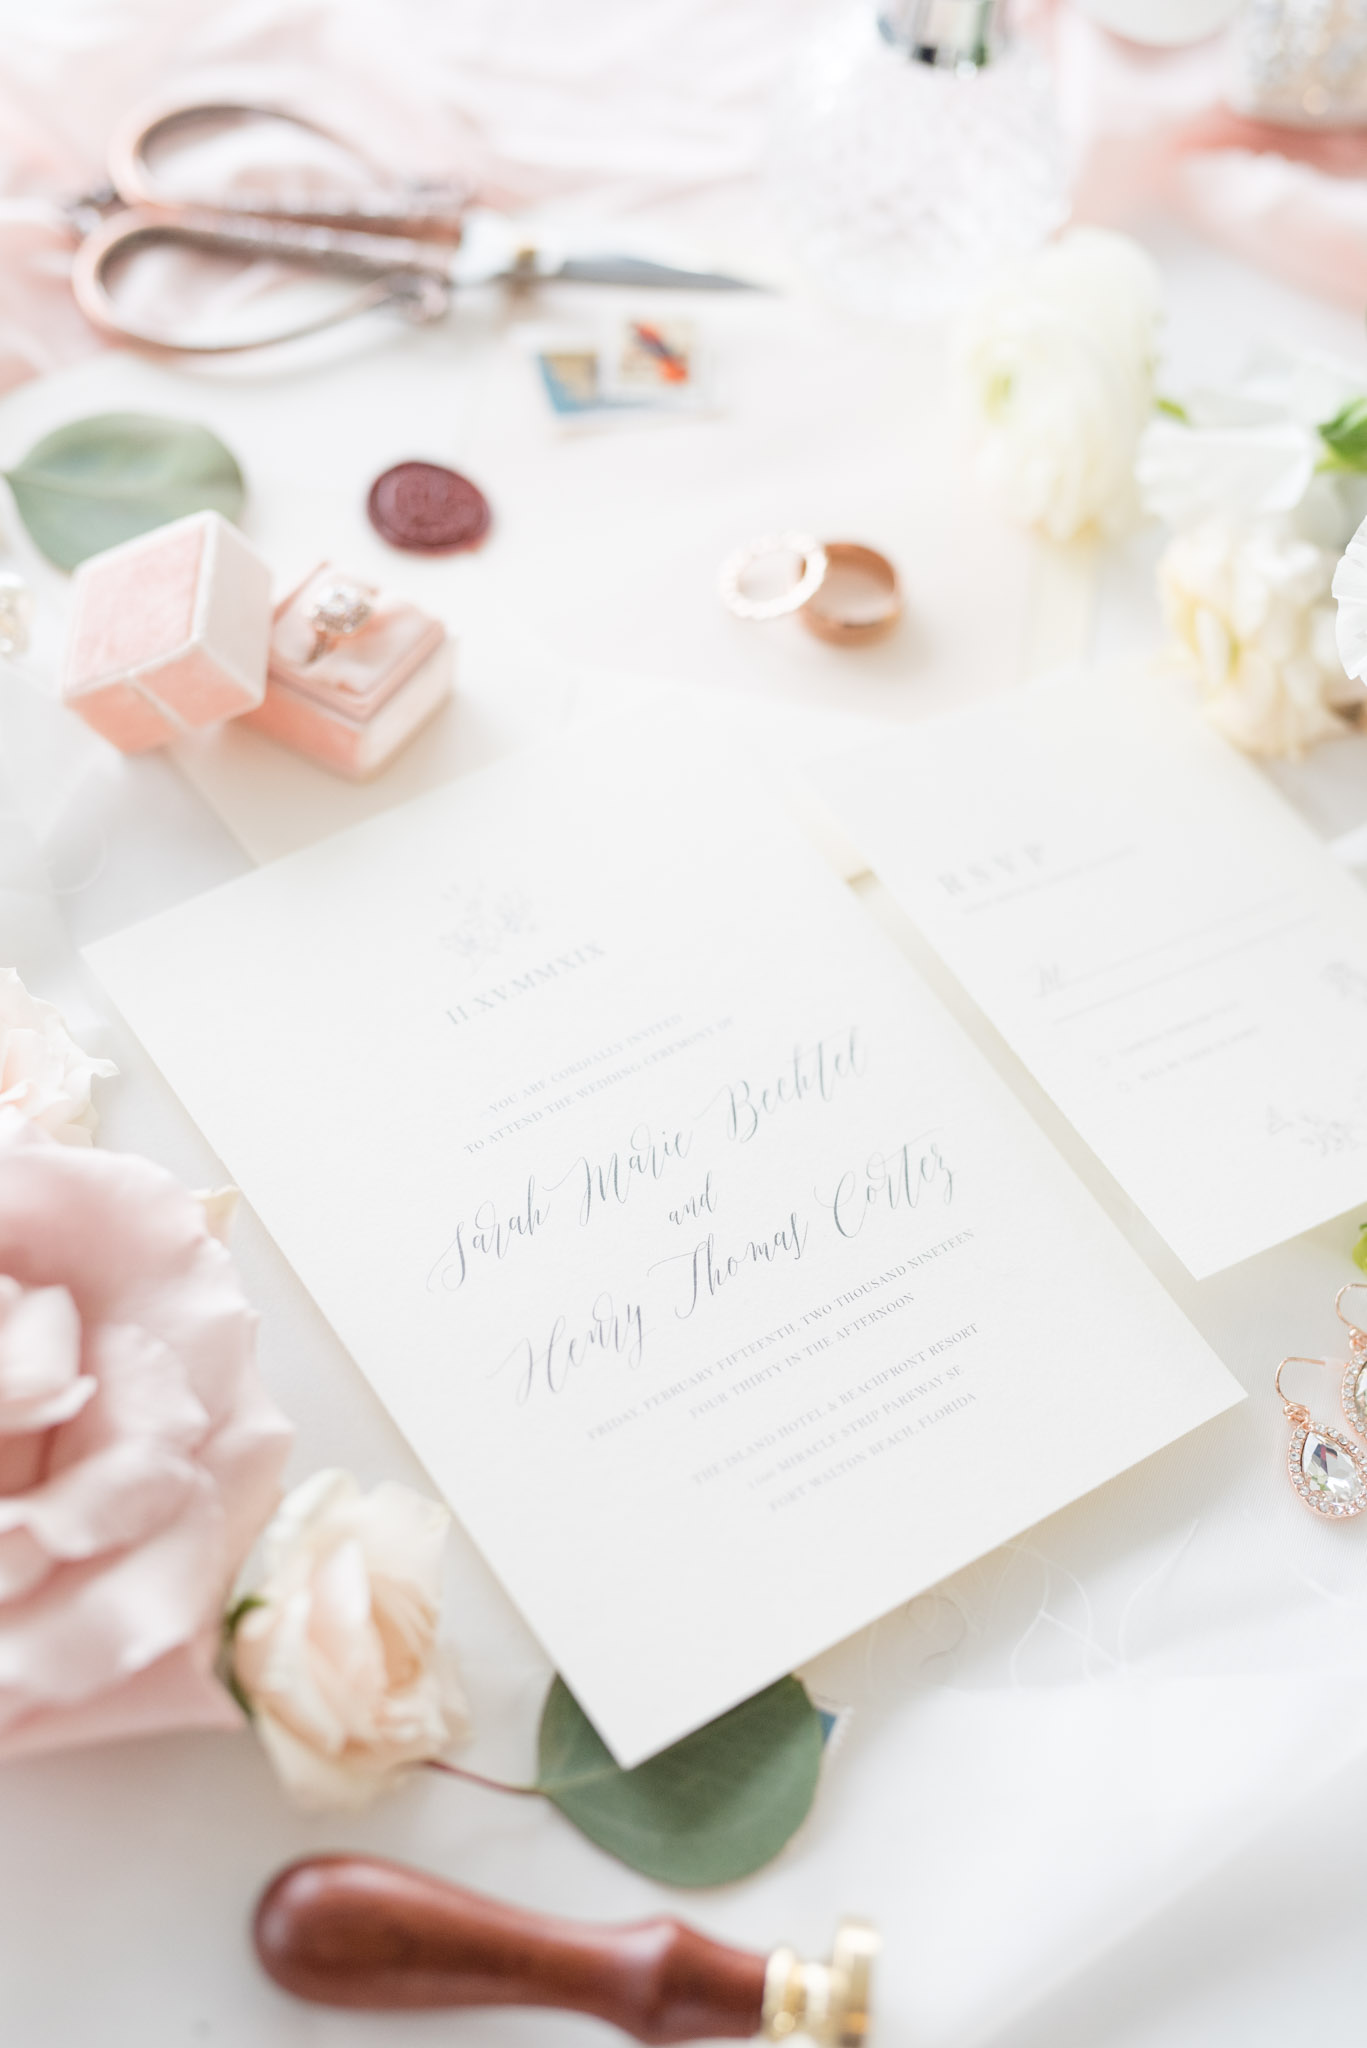 Wedding invitations with other bridal details.